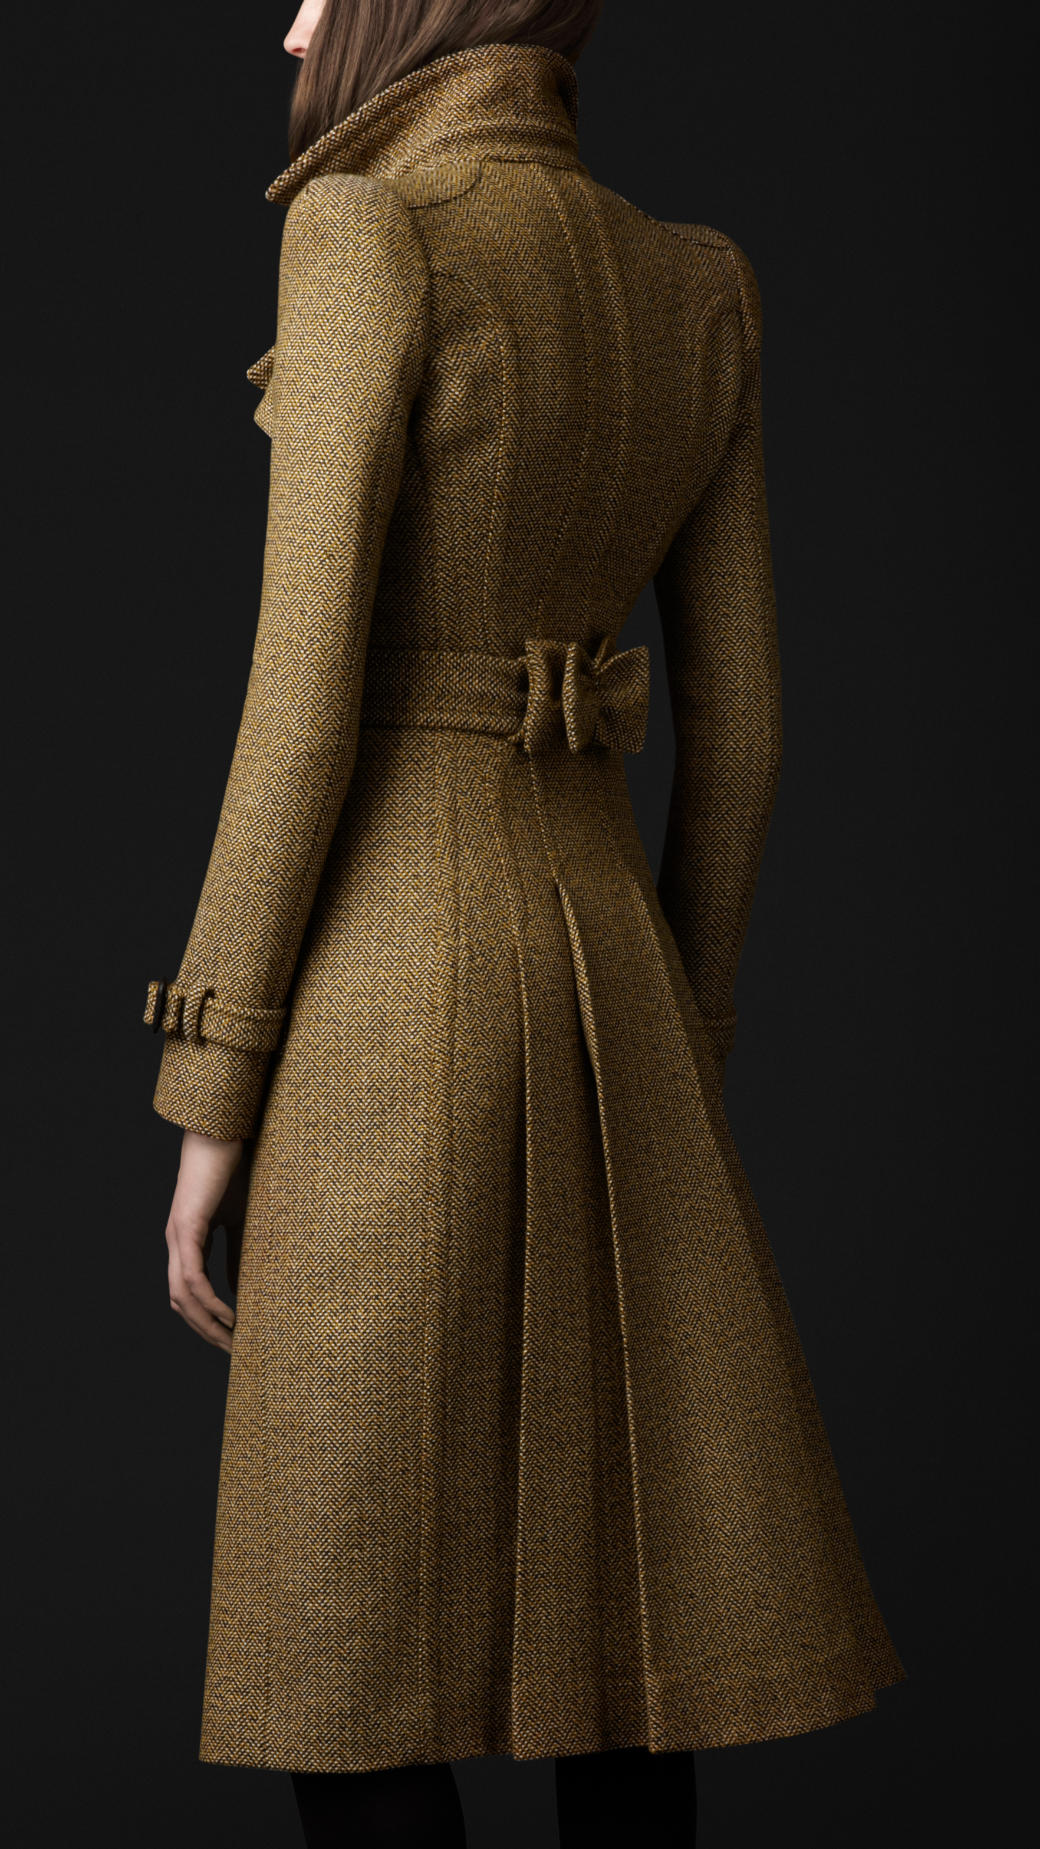 Lyst - Burberry Prorsum Tailored Wool Trench Coat in Natural